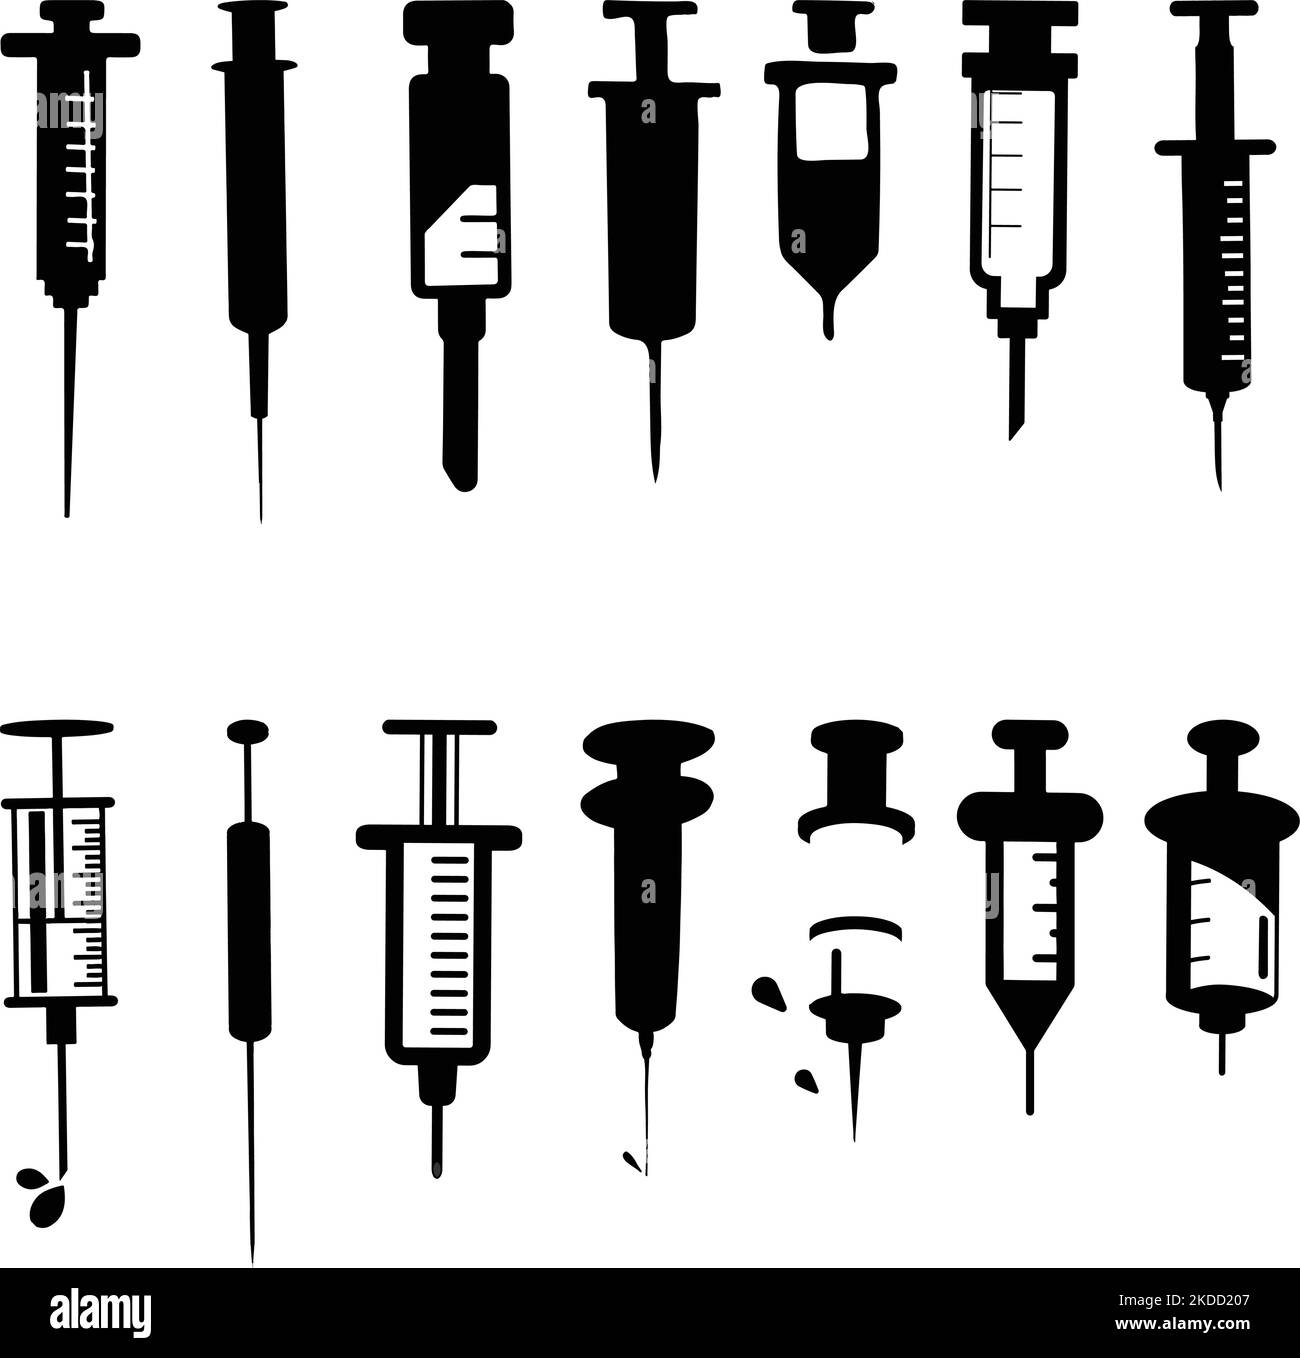 A pack of syringe SVG cut files (needles) silhouettes on the white background Stock Vector